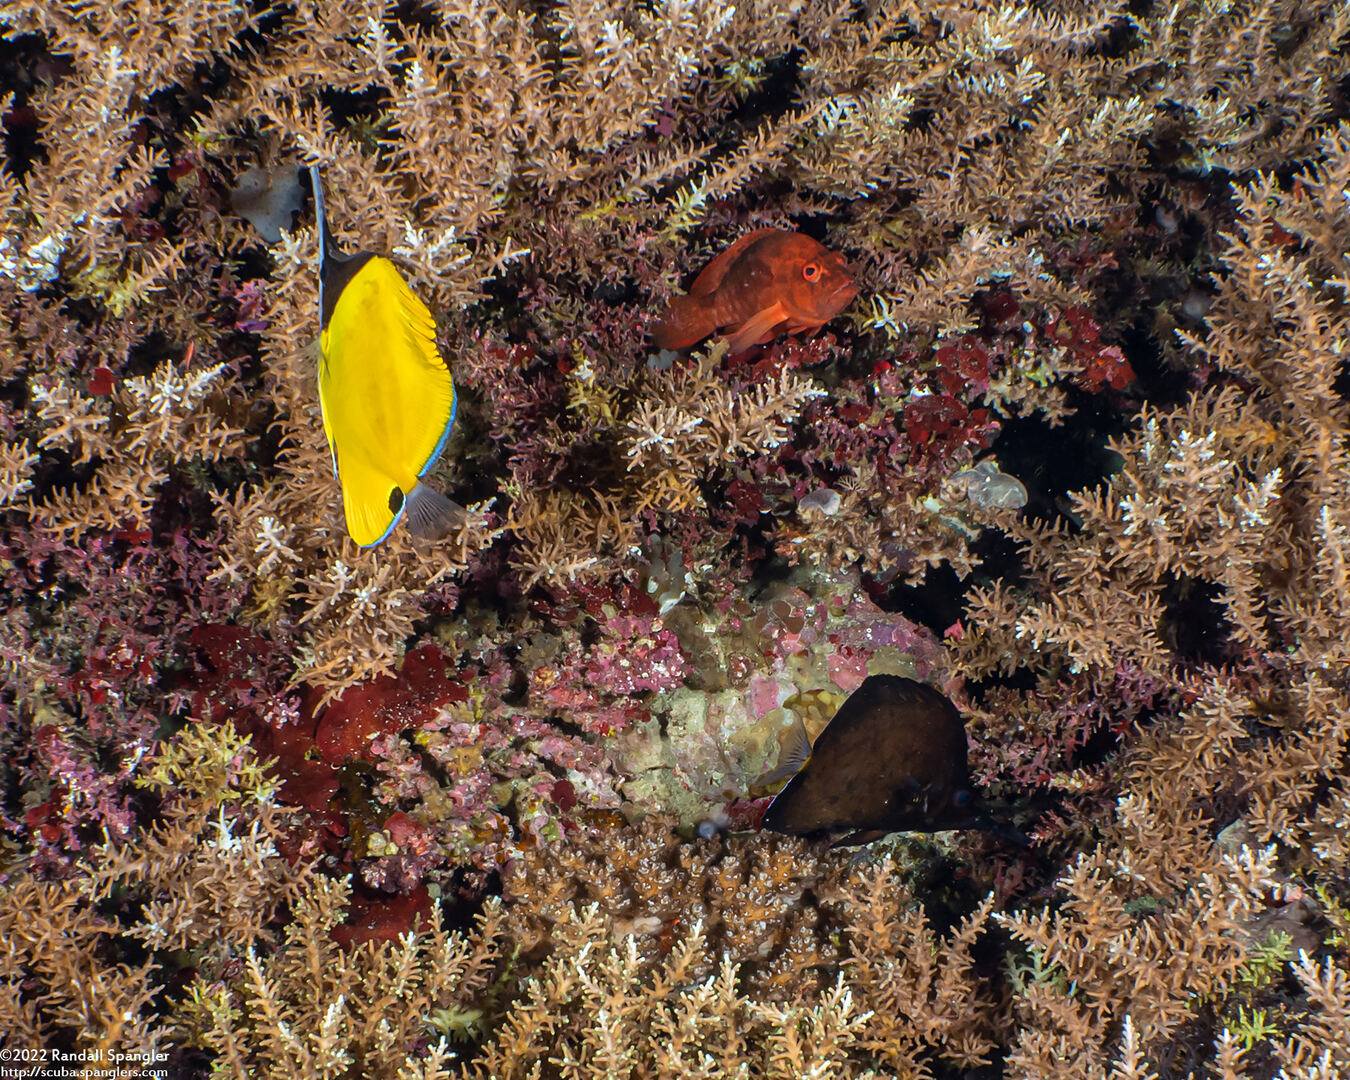 Forcipiger flavissimus (Common Longnose Butterflyfish); With black morph